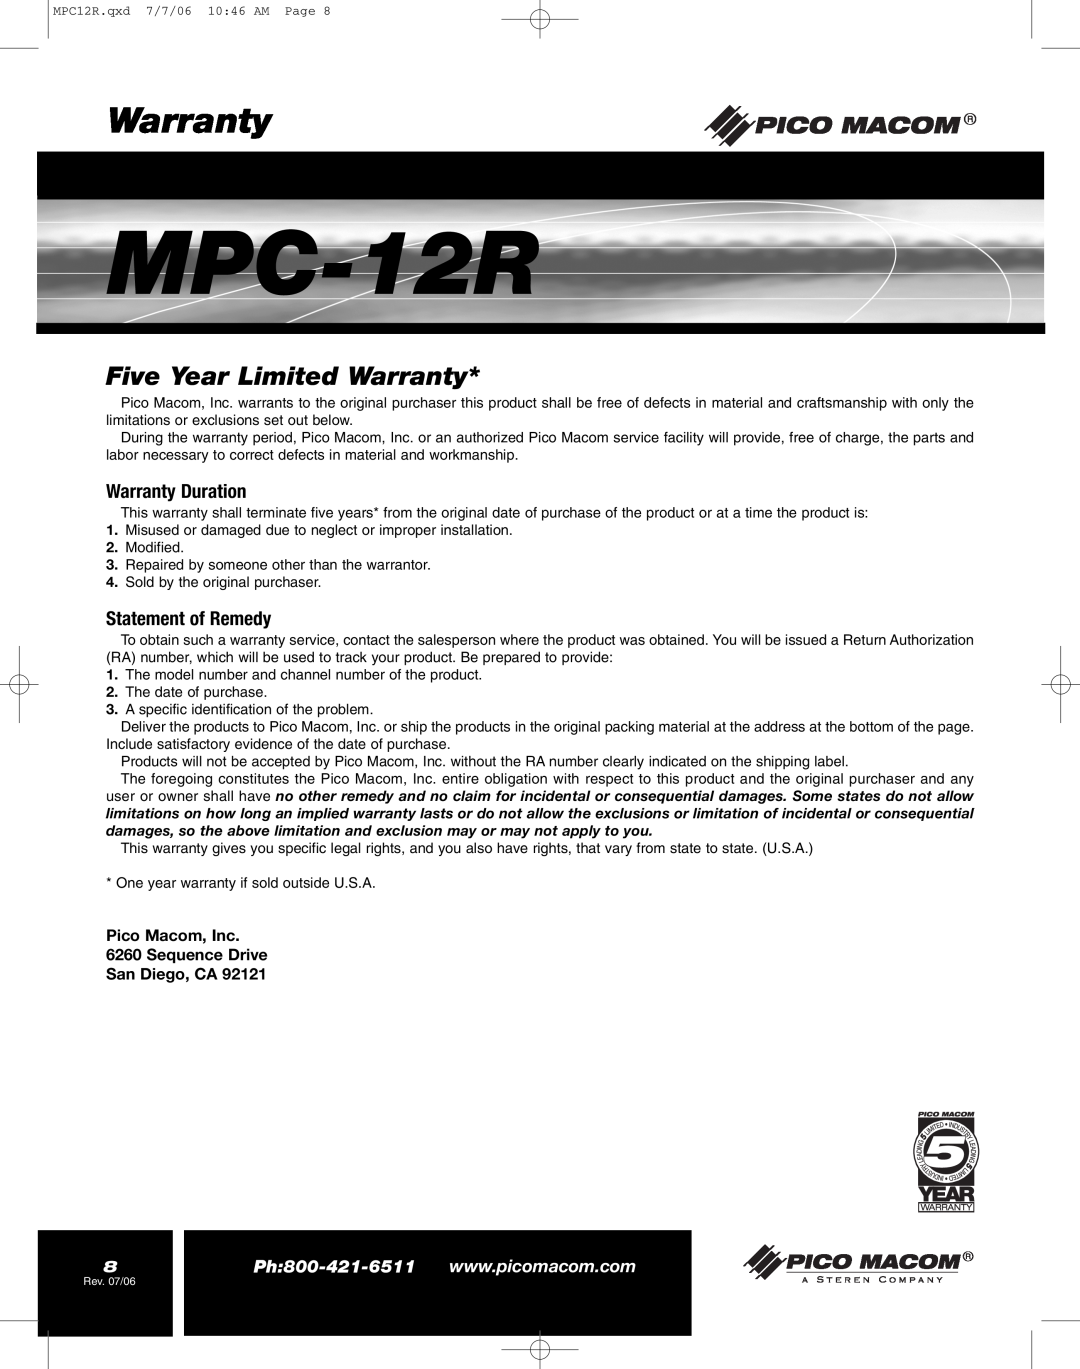 Pico Macom MPC-12R manual Five Year Limited Warranty, Warranty Duration, Statement of Remedy 